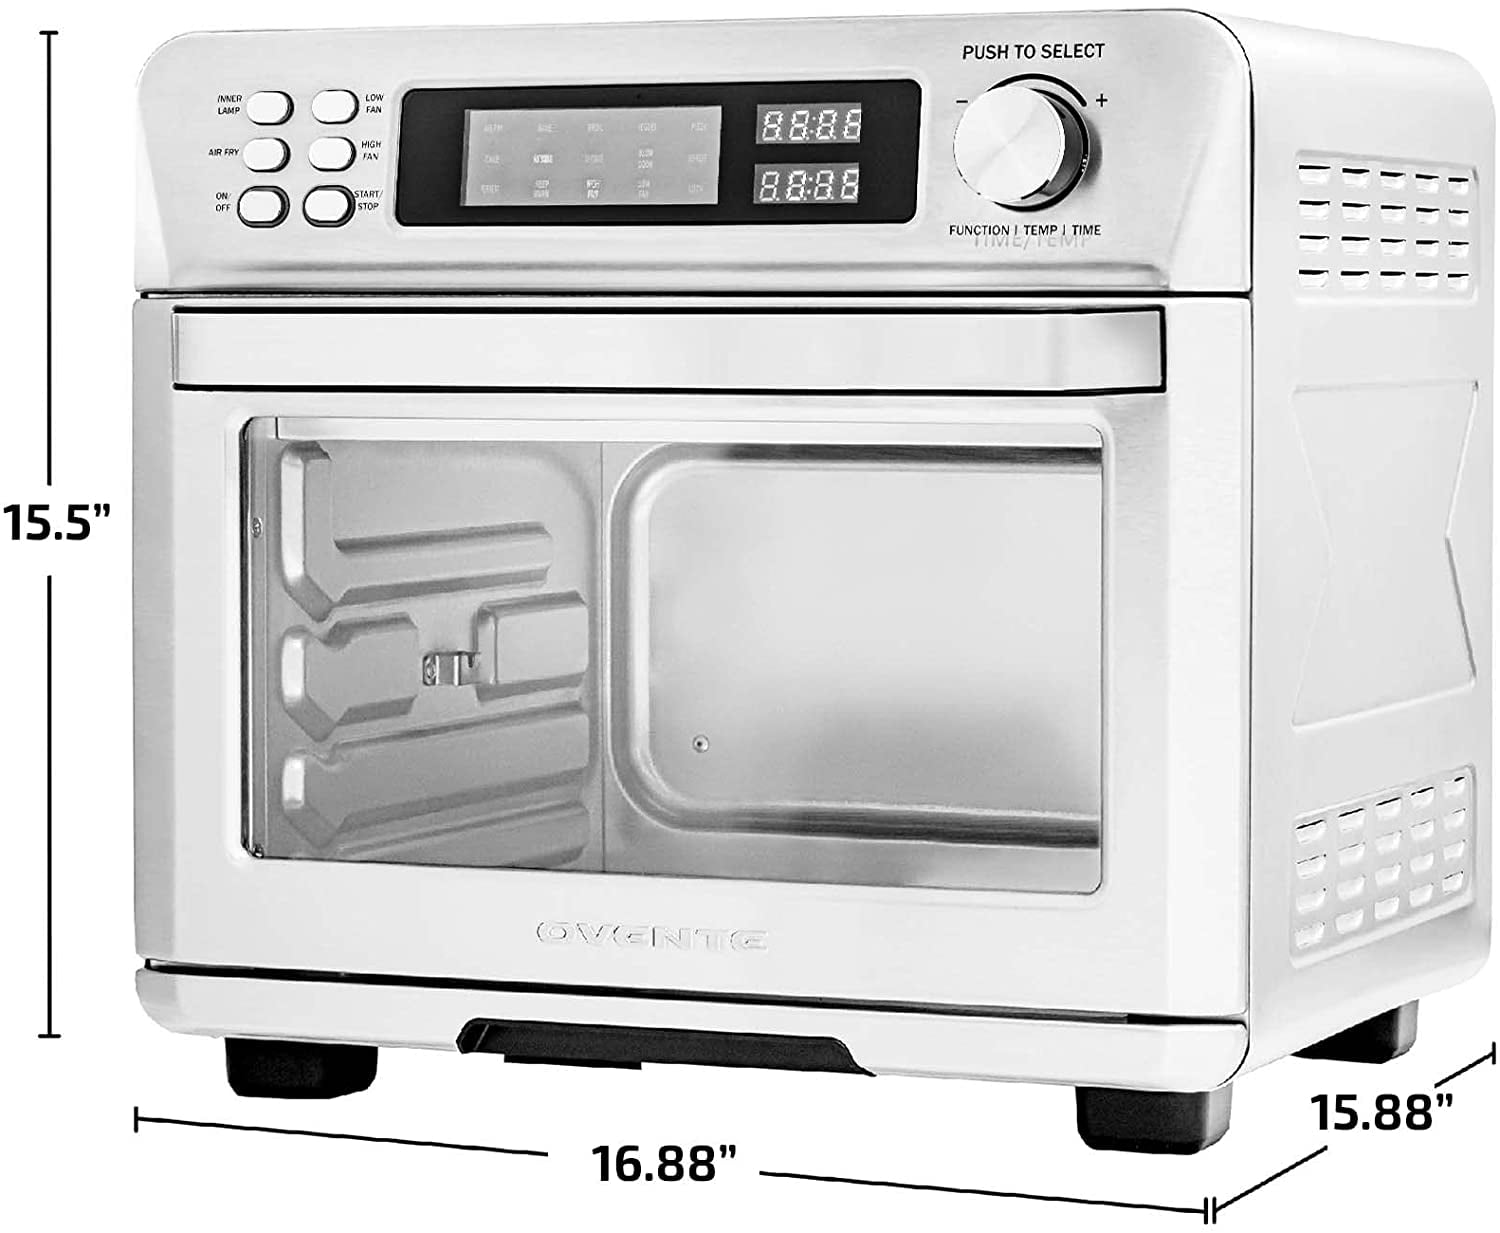 Zell Air Fryer Oven, 10In1 Convection Oven, 24Qt Combo Countertop Toaster  Oven With Rotisserie & Dehydrator, Rich Accessories, Silver 